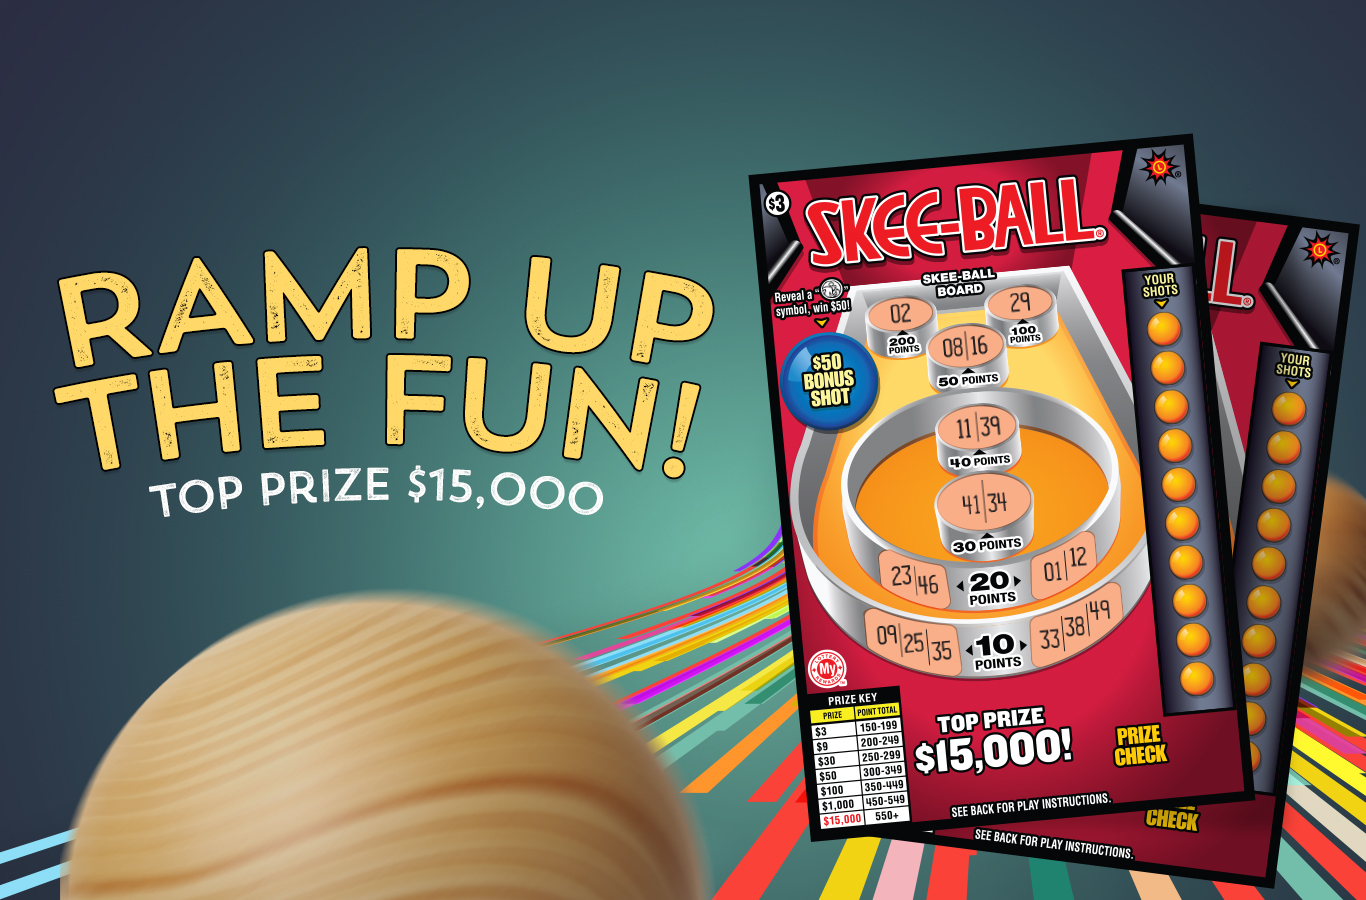 Ramp up the fun with new Skee-Ball Scratch-Offs. You could win up to $30,000. Play today and have a ball!